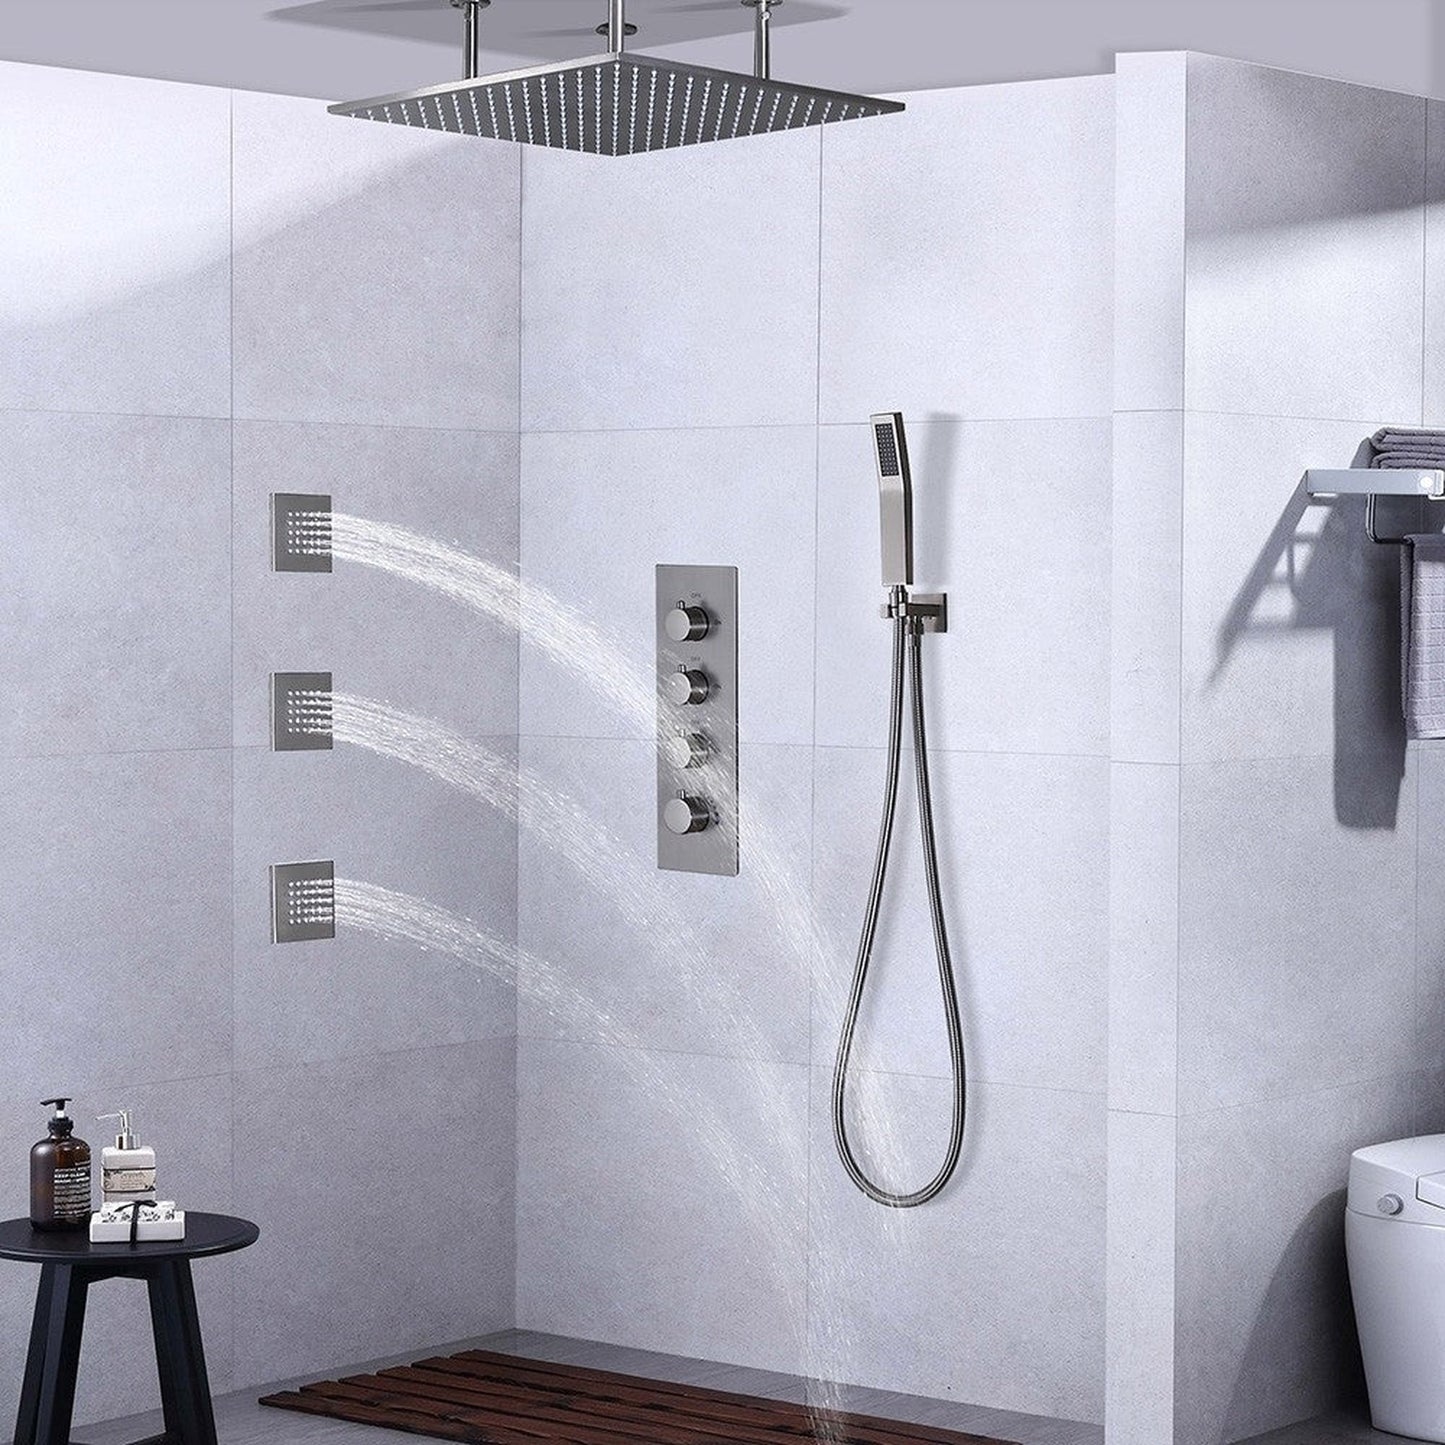 Fontana 24" x 24" Brushed Nickel Ceiling Mounted Thermostatic Valve Shower System With 3-Jet Sprays, Hand Shower and Water Powered LED Lights